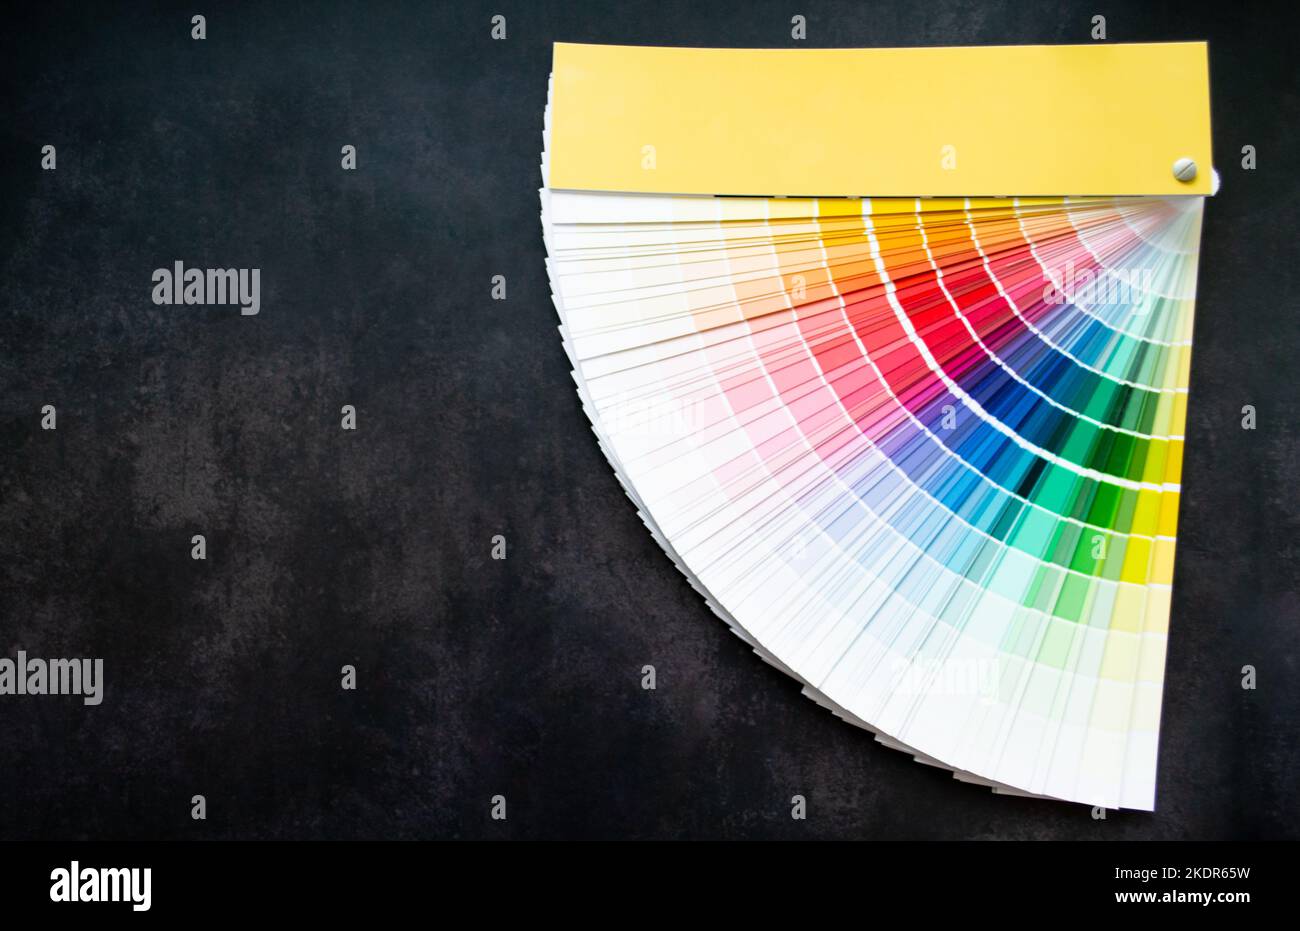 Paper fan paint swatch interior design, wall painting. Black background, copy space. Stock Photo